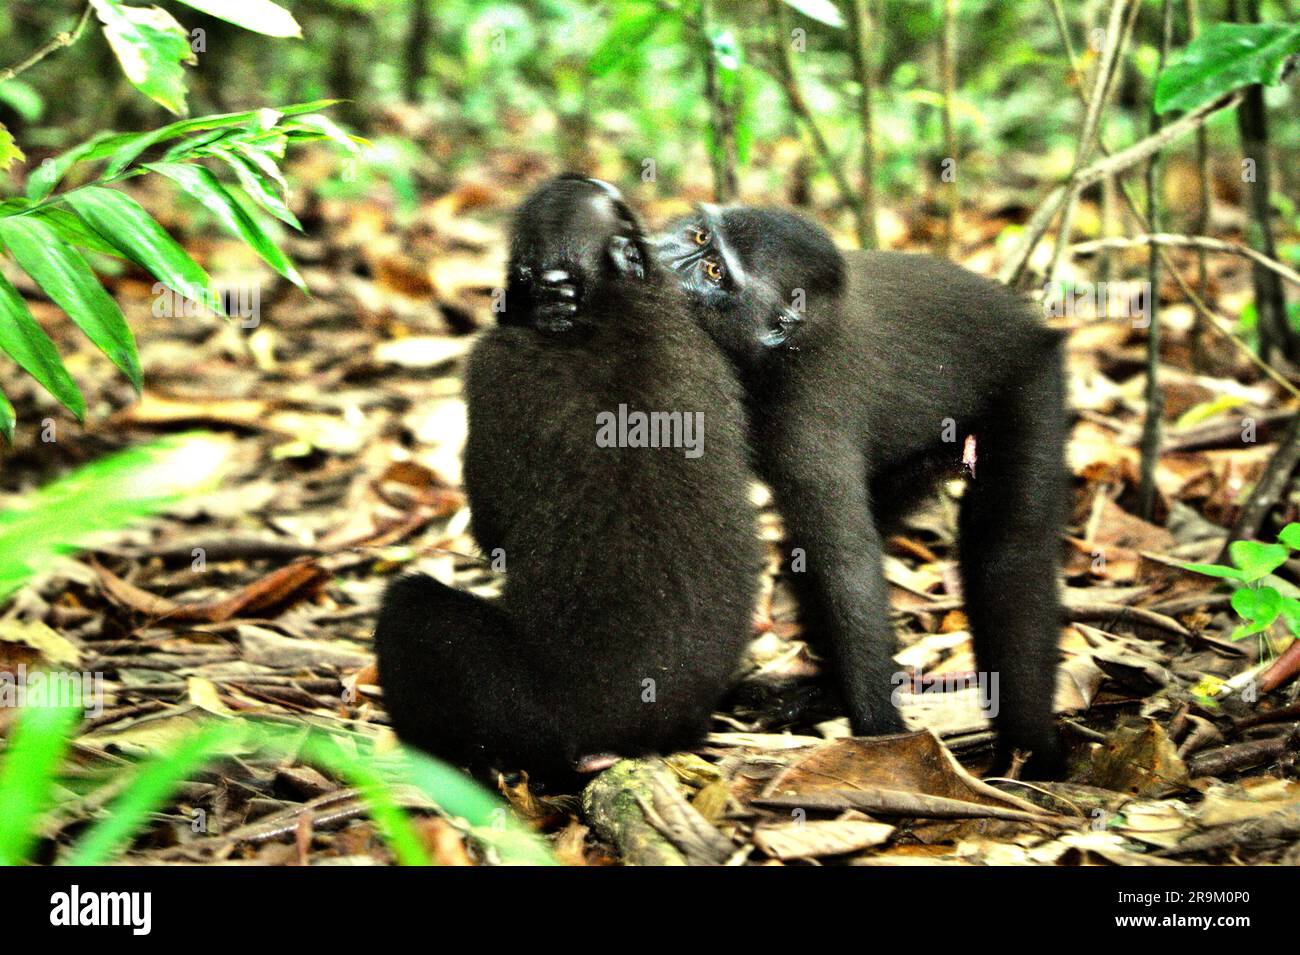 A Sulawesi black-crested macaque (Macaca nigra) is comforting another individual by 'kissing' in Tangkoko Nature Reserve, North Sulawesi, Indonesia. Climate change may gradually change behaviours and reproductive cycle of this threatened species, while at the same time reduce their habitat suitability, that could force them to move out of safe habitats and face potential conflicts with human, scientists say. Without the warming temperature, primates have already suffered from the escalating anthropogenic pressures, causing them to have declining population and extinction risk. Stock Photo